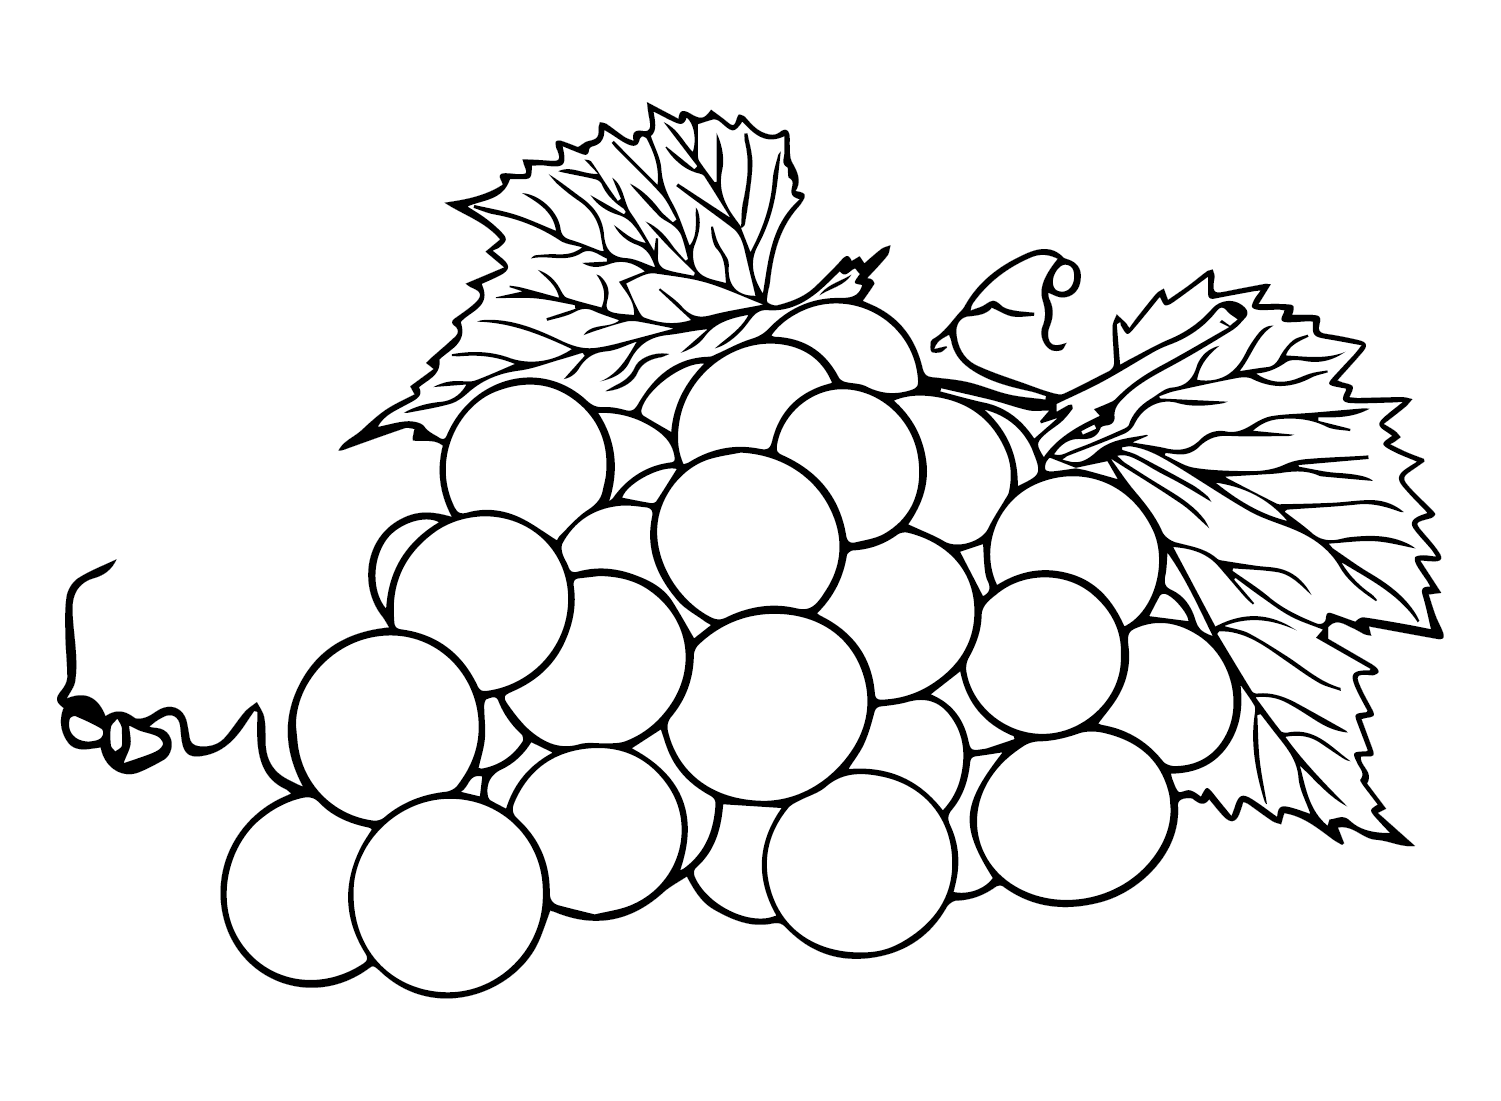 Bunch of Grapes Coloring Page